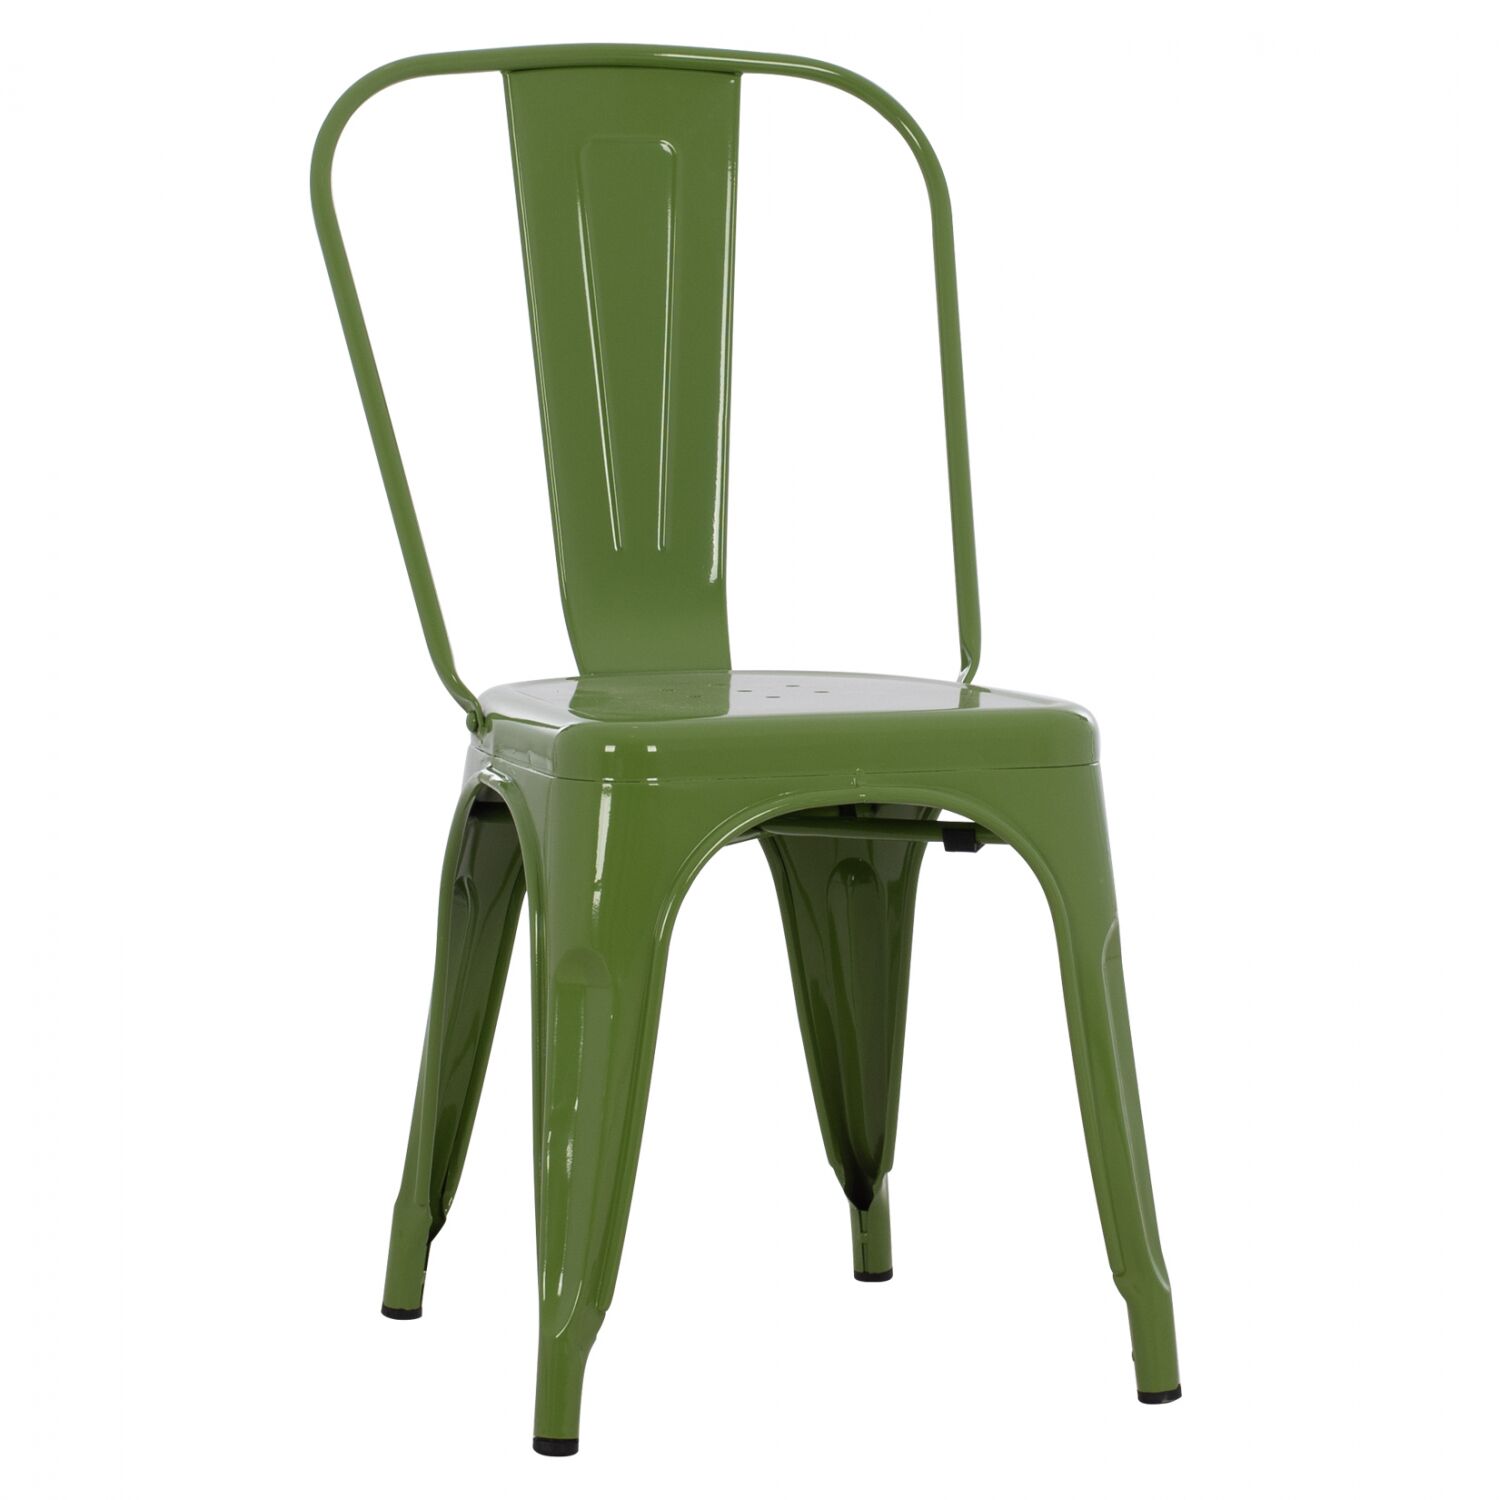 DINING CHAIR MELITA HM8641.13 METAL IN LIGHT OLIVE GREEN COLOR 43x50x82Hcm.